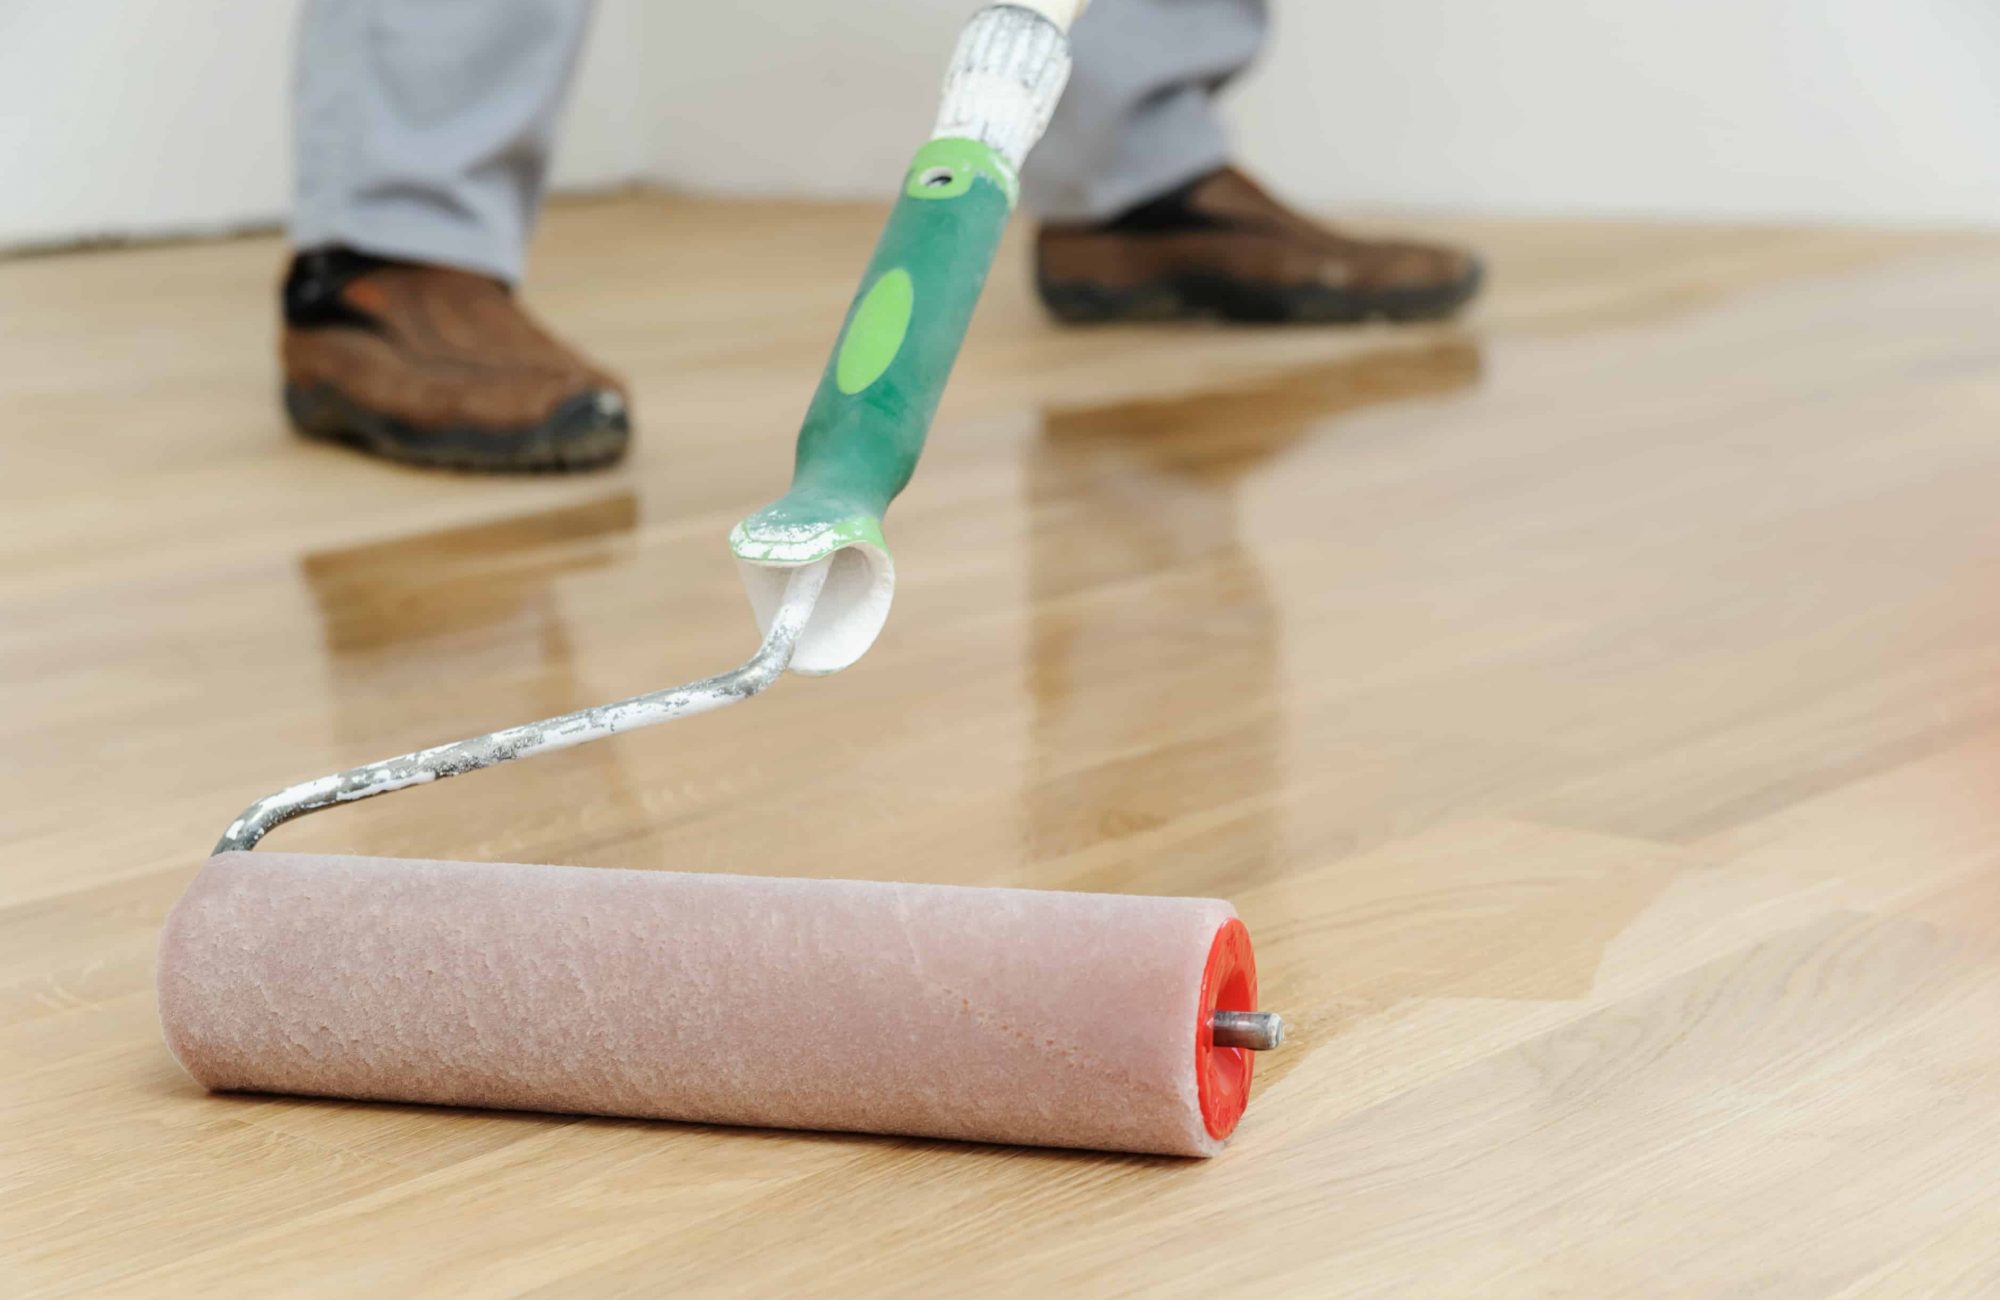 Lacquering wood floors. Use roller for coating floors.